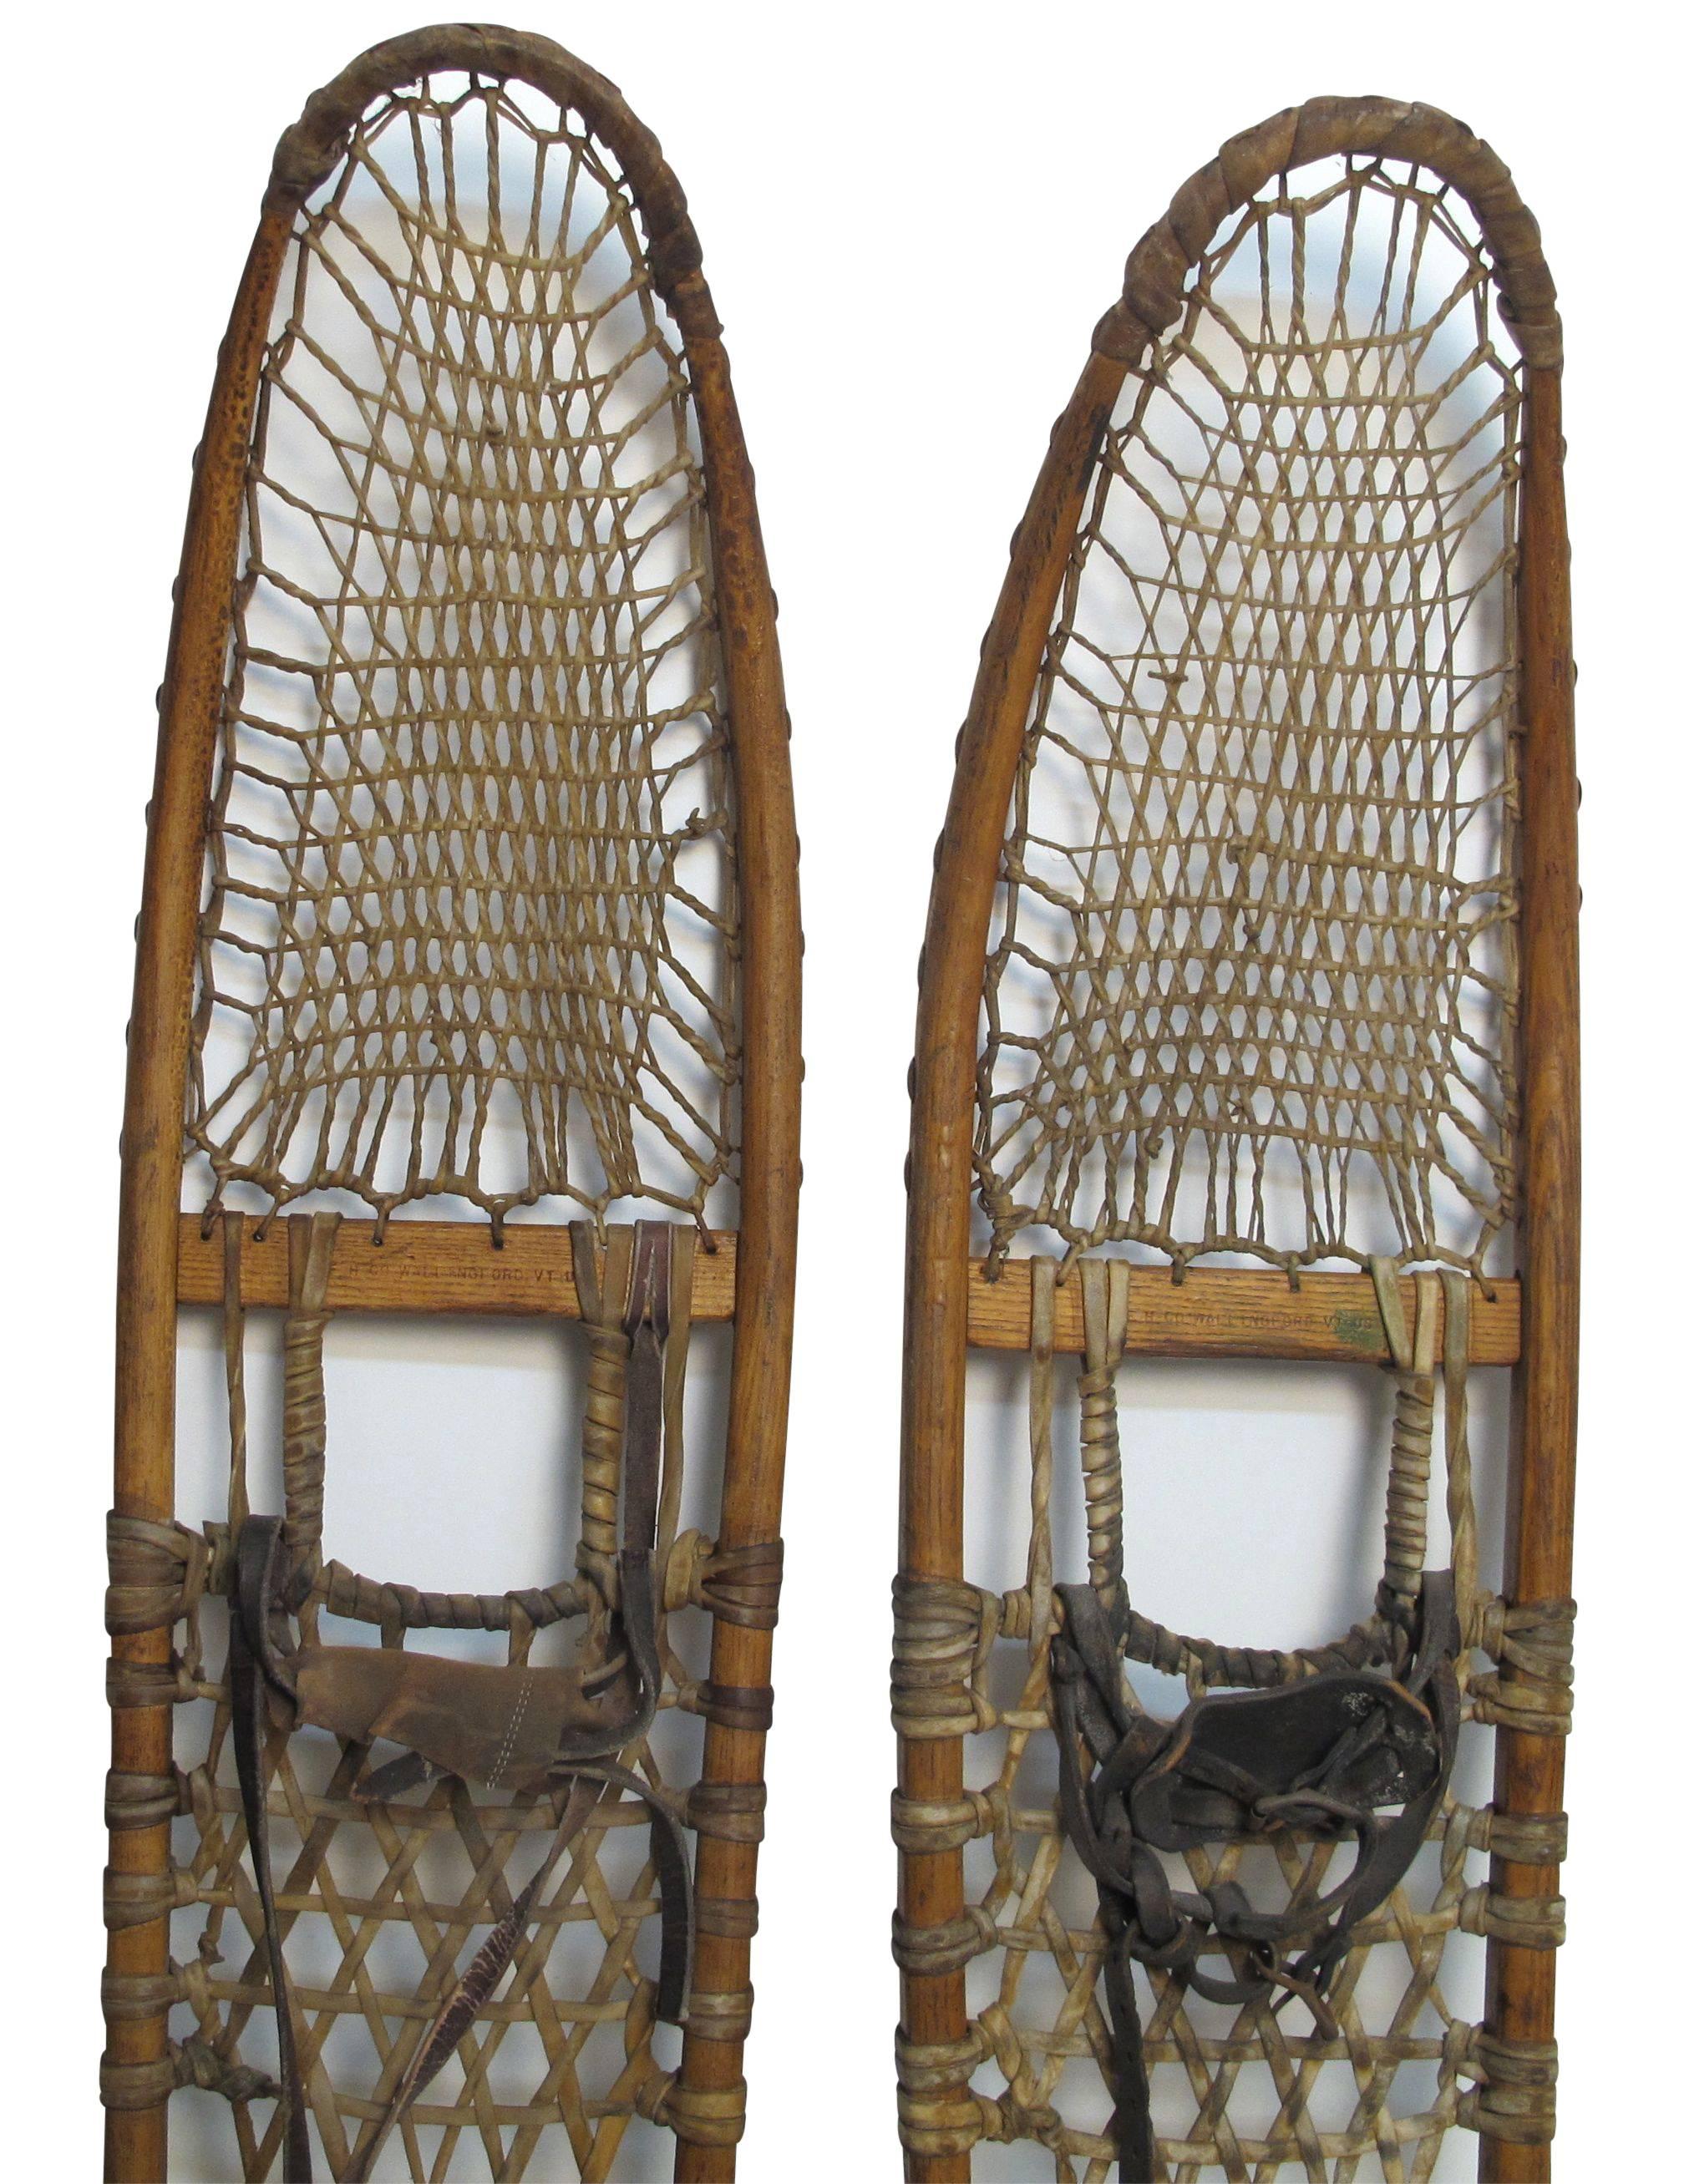 A large pair of antique snowshoes having a wood frame, rawhide webbing and leather straps. Marked E. H. Co. Wallingford Vermont US.